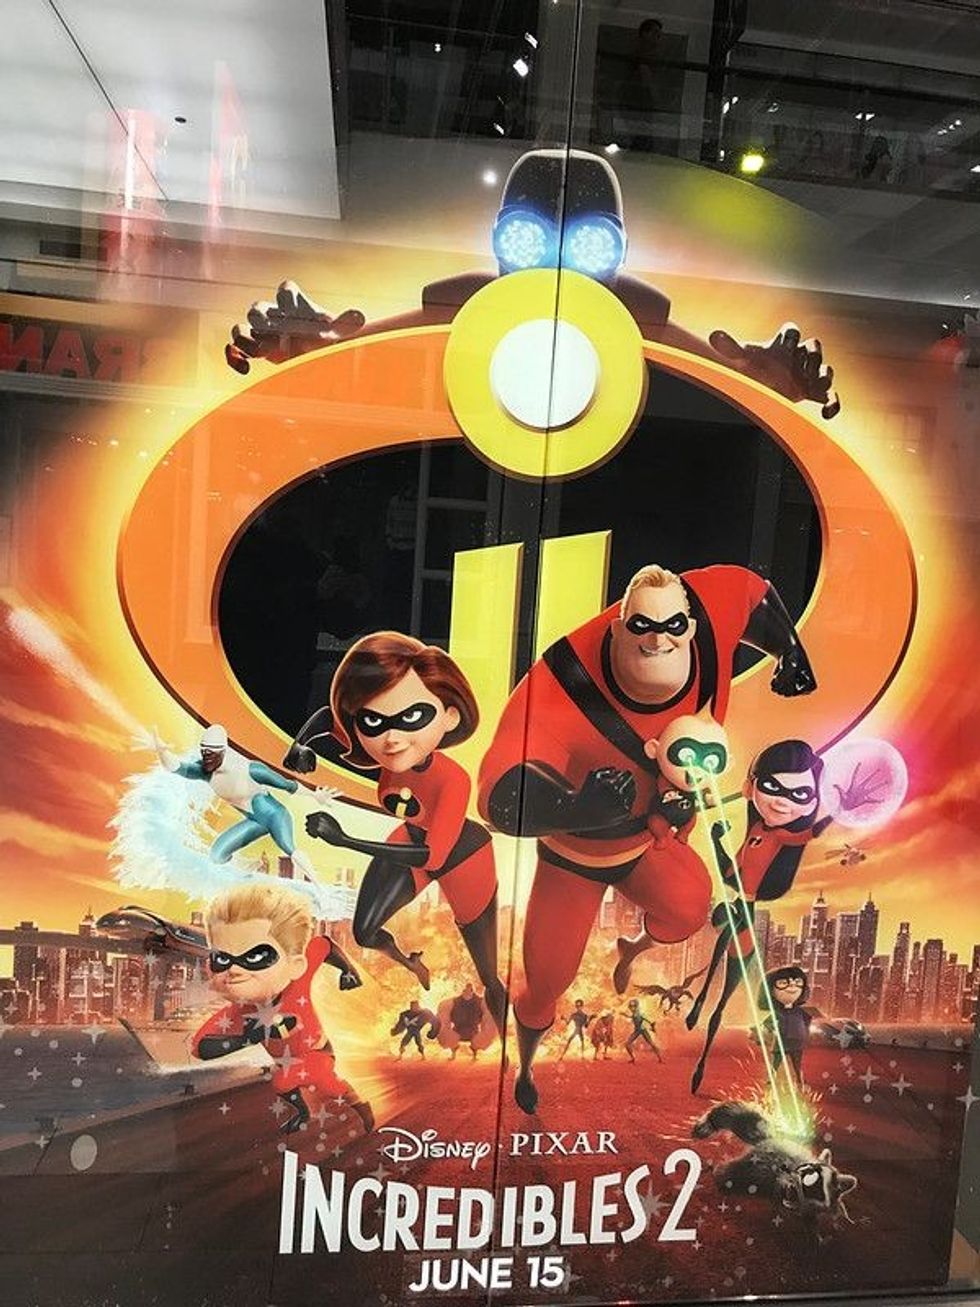 Decal on a window featuring characters in the Incredibles 2